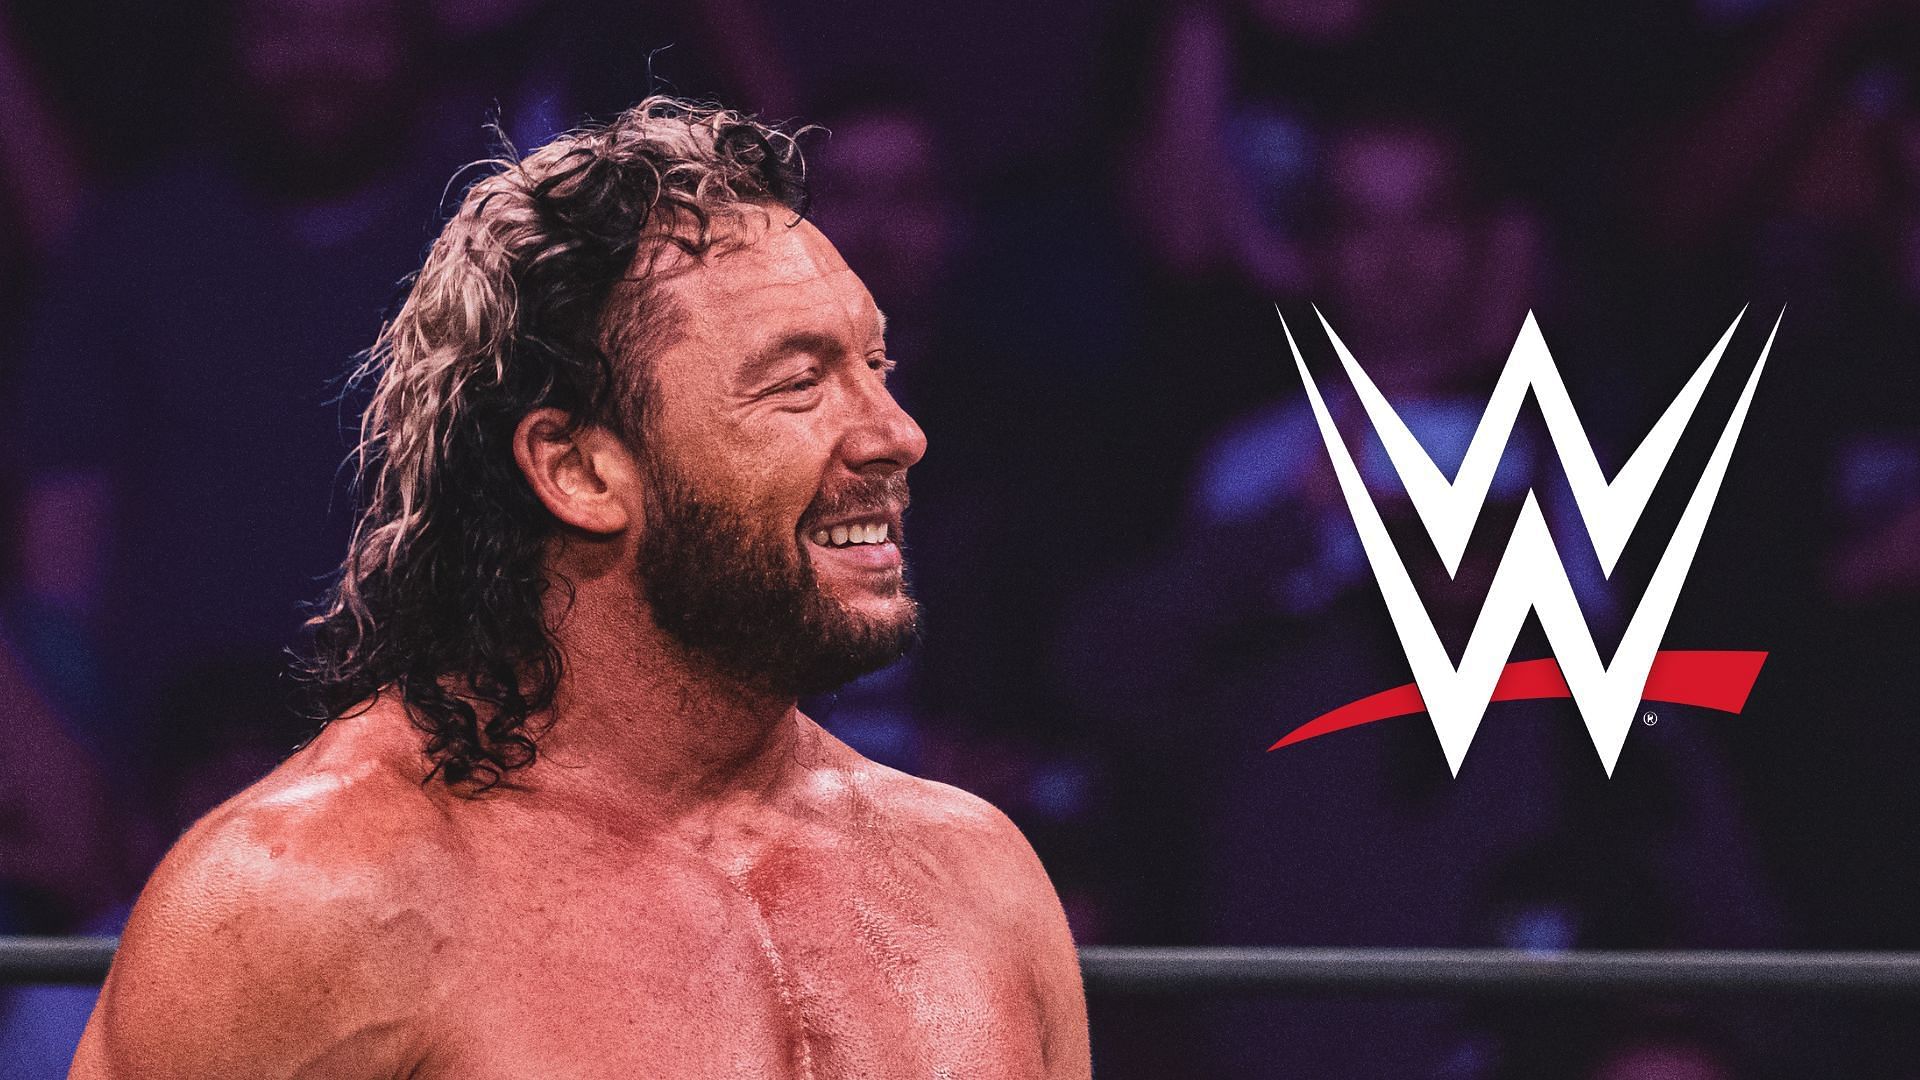 Kenny Omega has provided an update on good friend of his